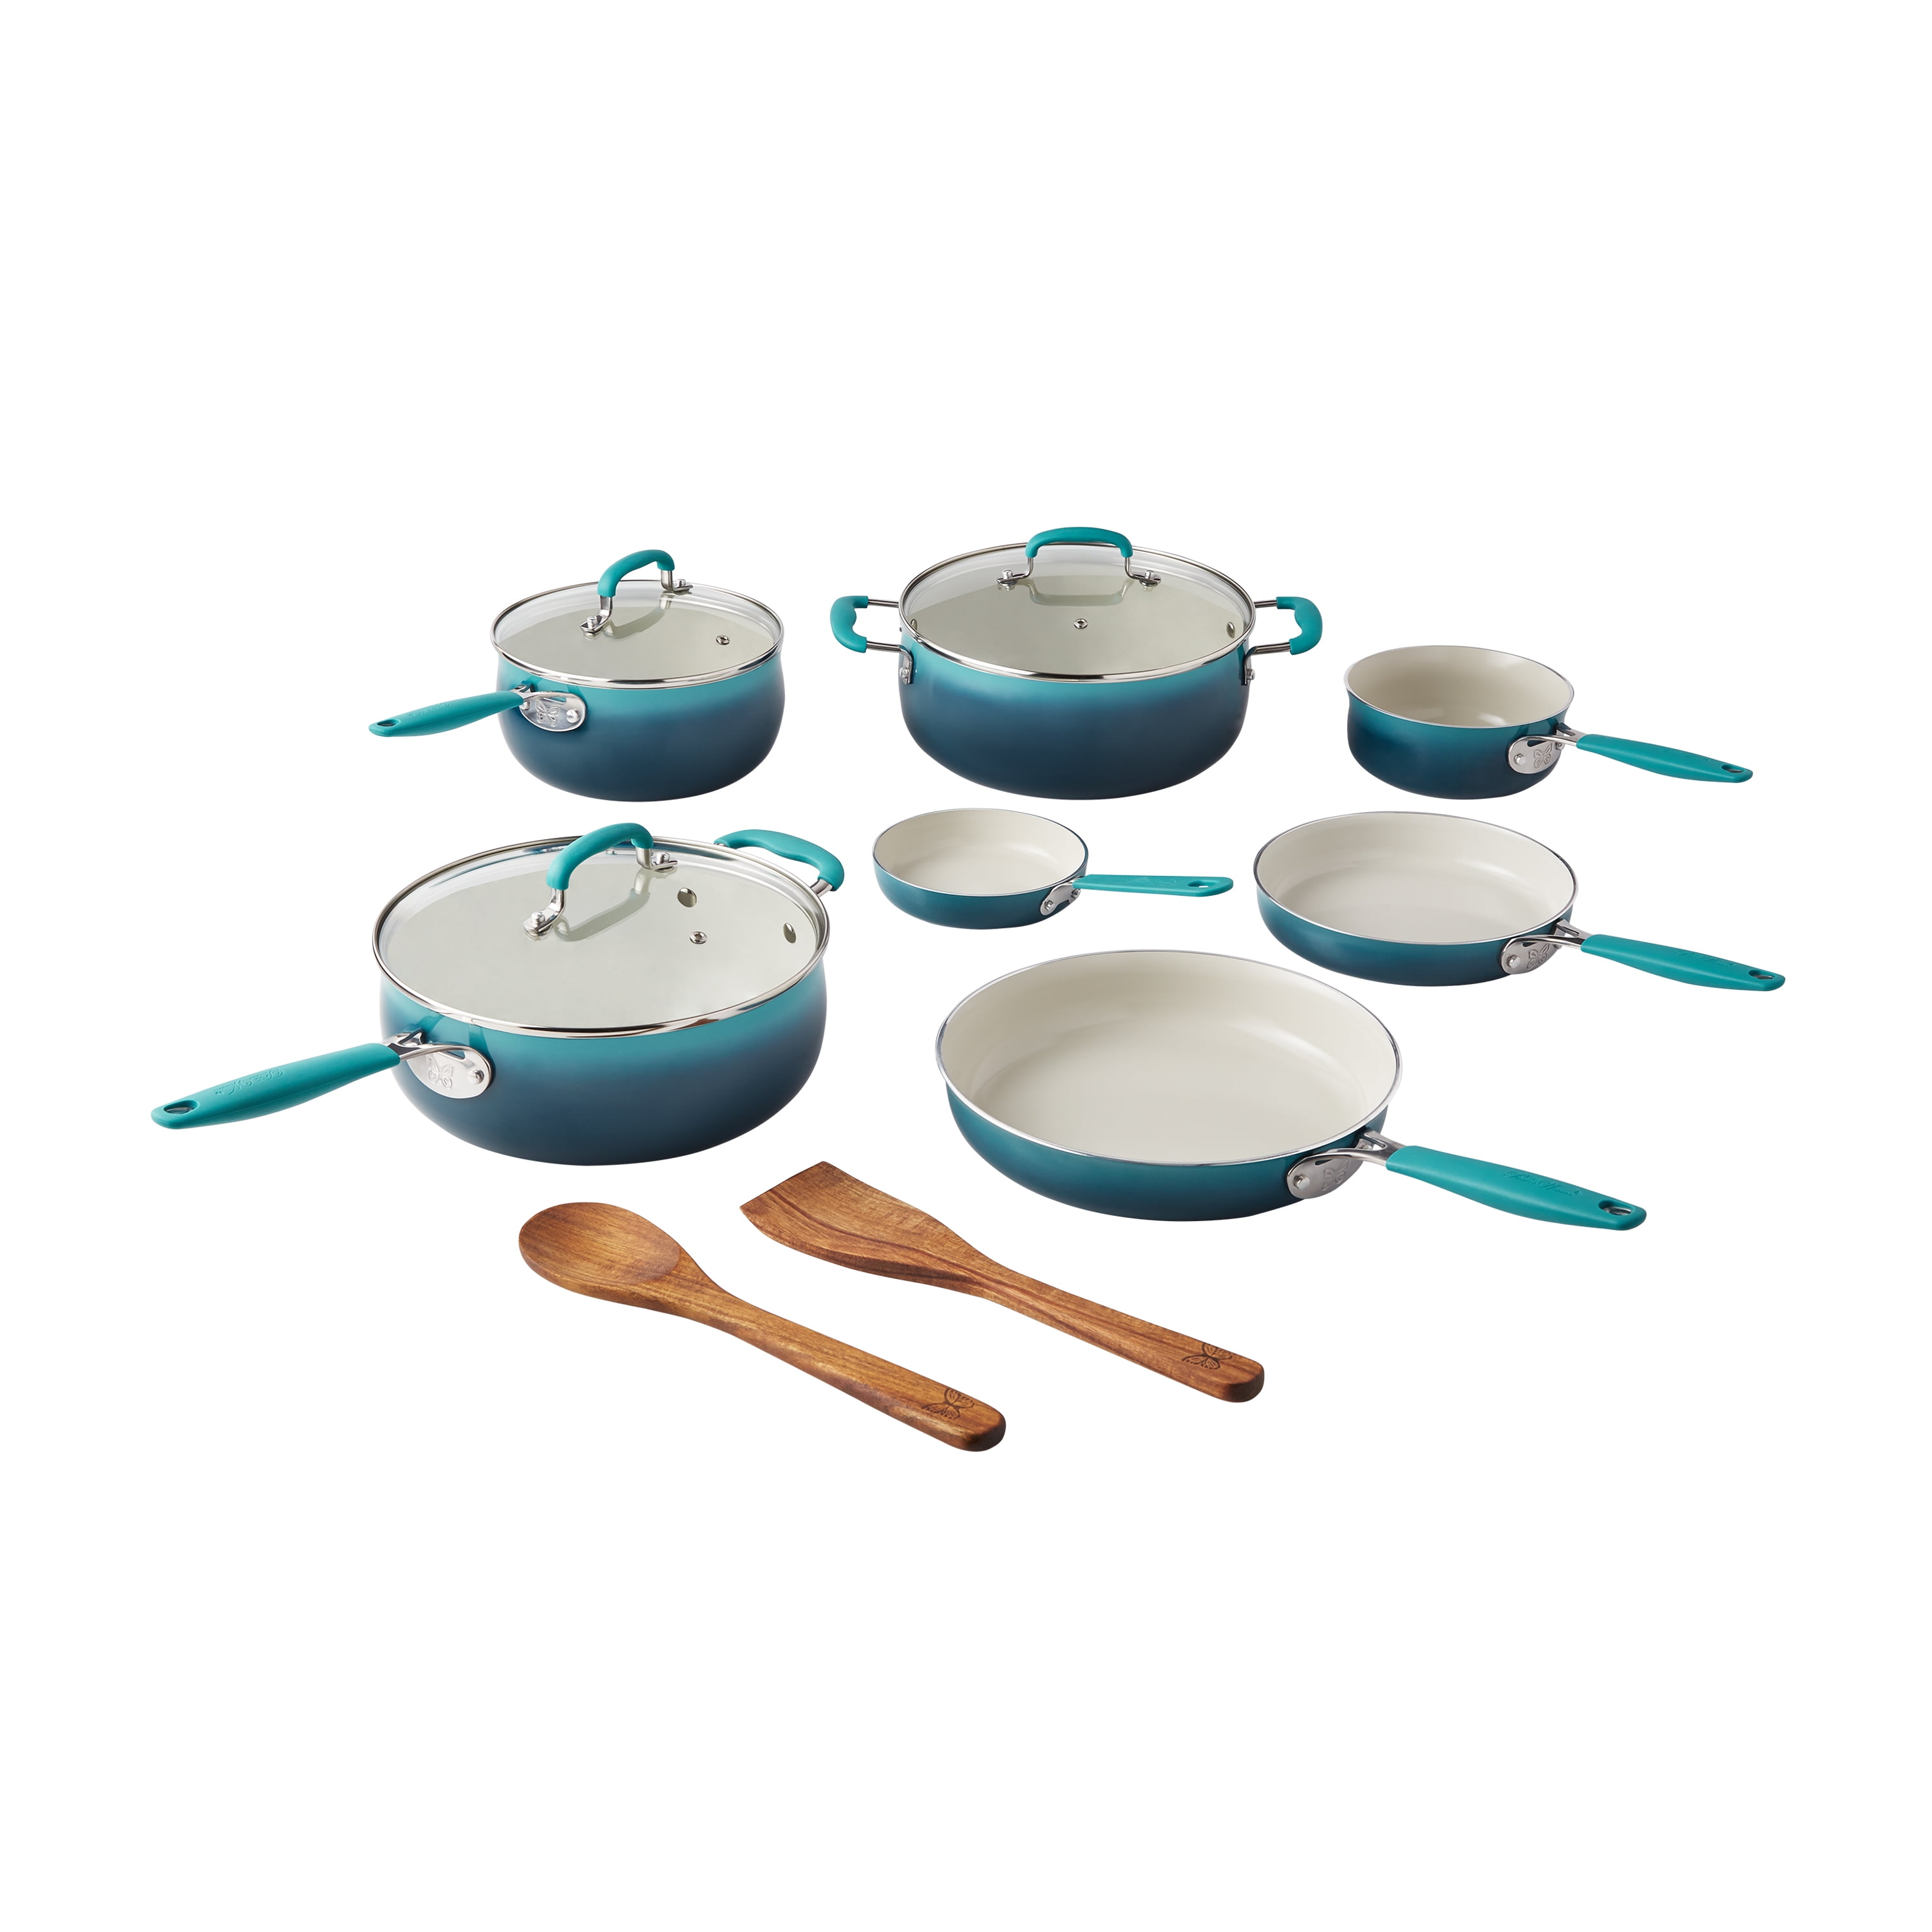 The Pioneer Woman VIPRB-25Pcs 25 Piece Ceramic Nonstick Aluminum Easy Clean Cookware Set, Ombre Teal